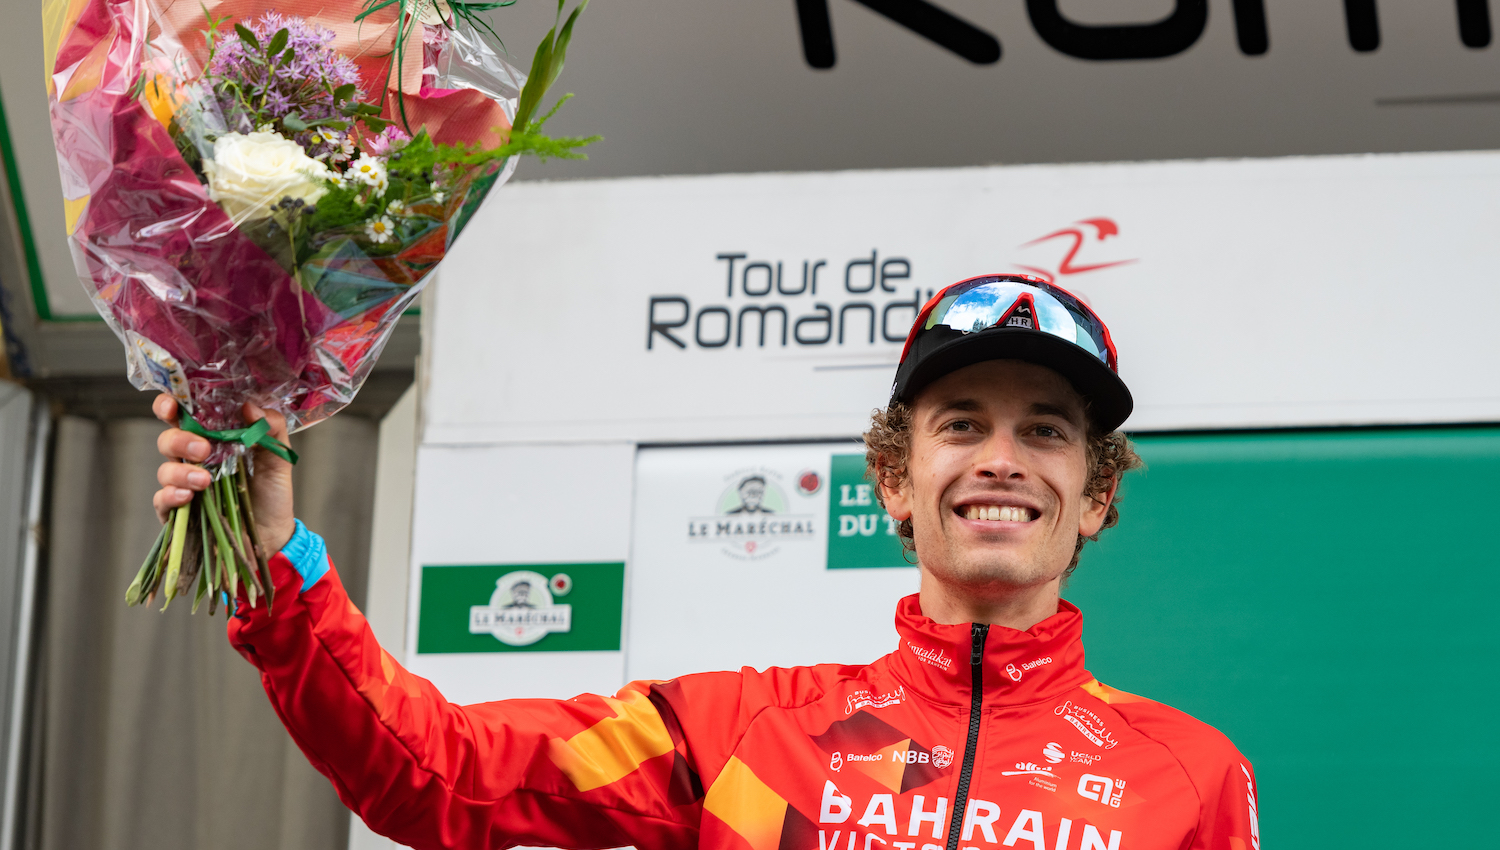 VILLARS-SUR-OLLON, SWITZERLAND - MAY 01: Gino Mader of Switzerland and Team Bahrain Victorious celebrates the second place on the podium after the 75th Tour De Romandie 2022 - Stage 5 on May 1, 2022 in Villars-sur-Ollon, Switzerland. (Photo by RvS.Media/Basile Barbey/Getty Images,)